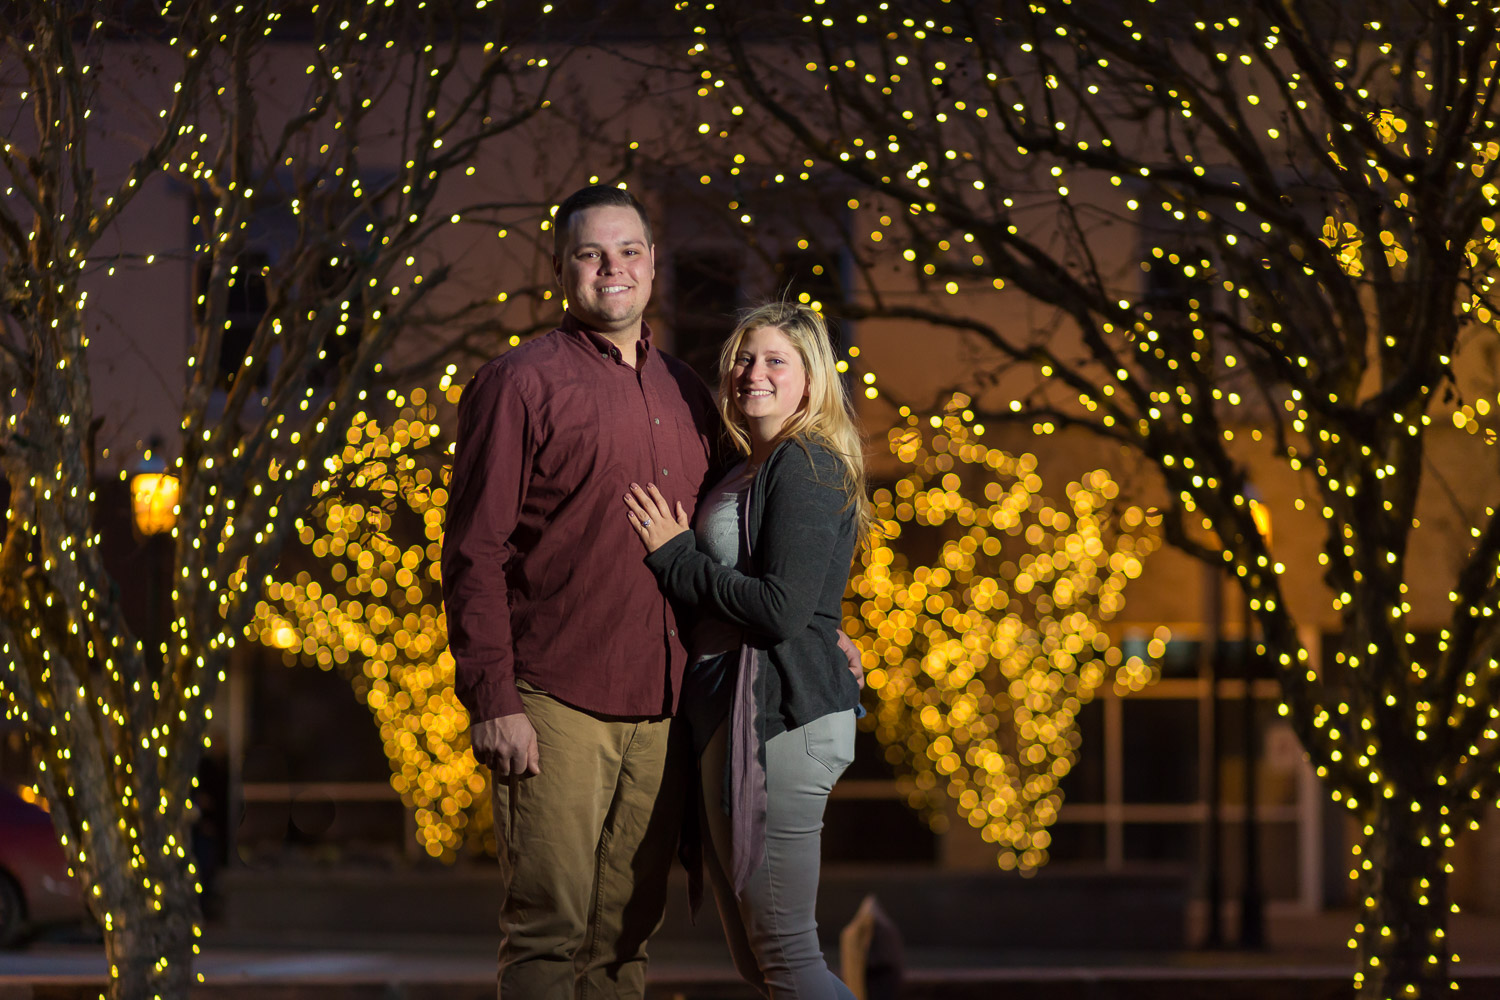 Downtown Glenwood Springs Engagment Shoot in the evening with holiday lights